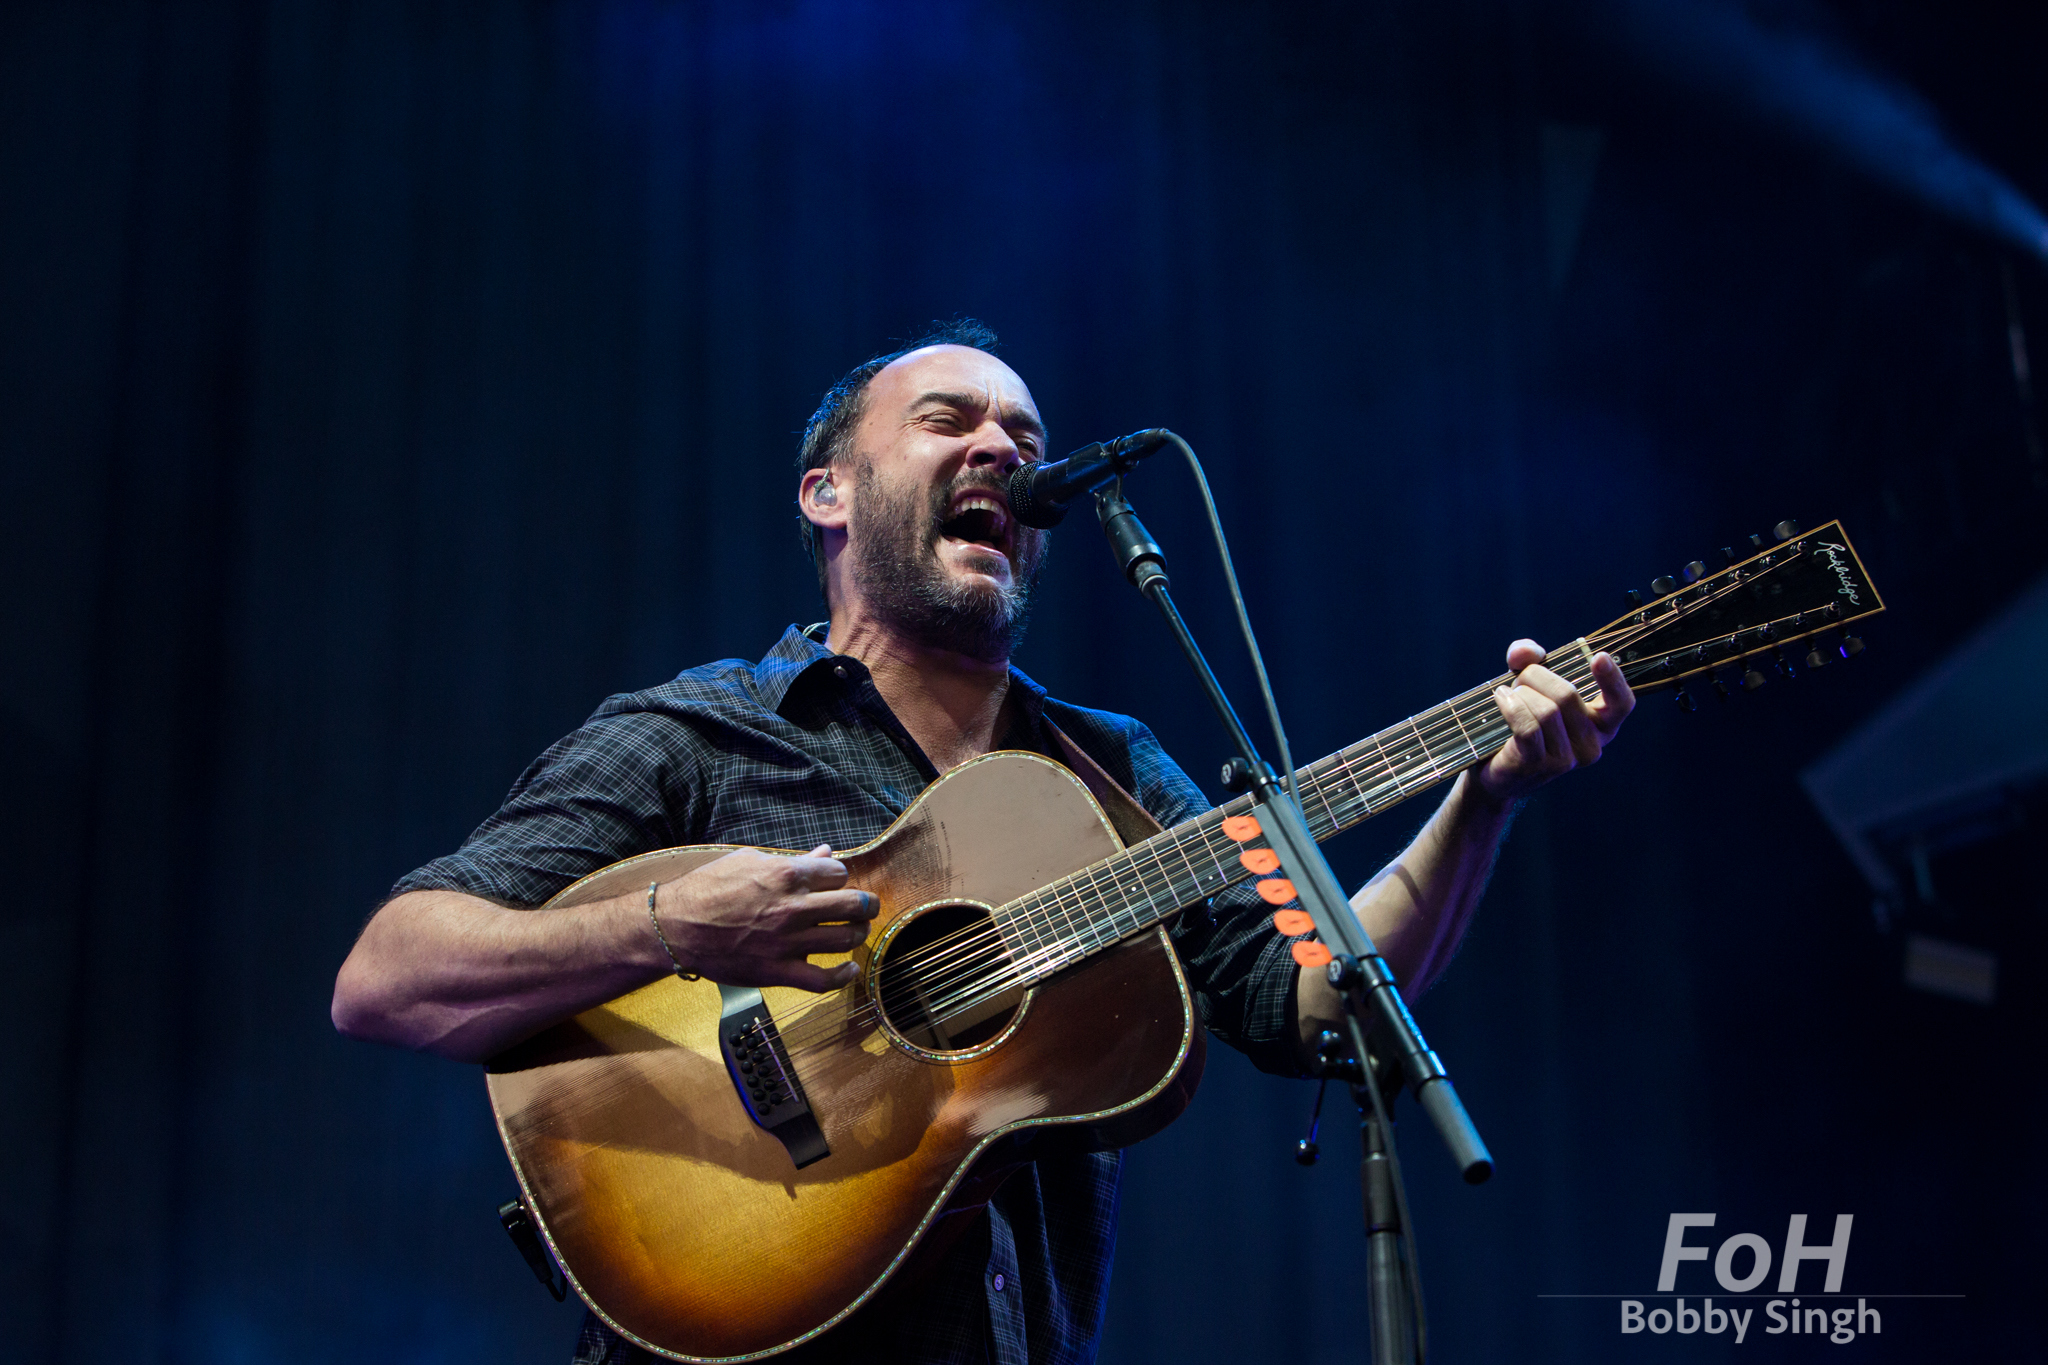  Dave Matthews Band performs in Toronto. Photo by Bobby Singh/@fohphoto 